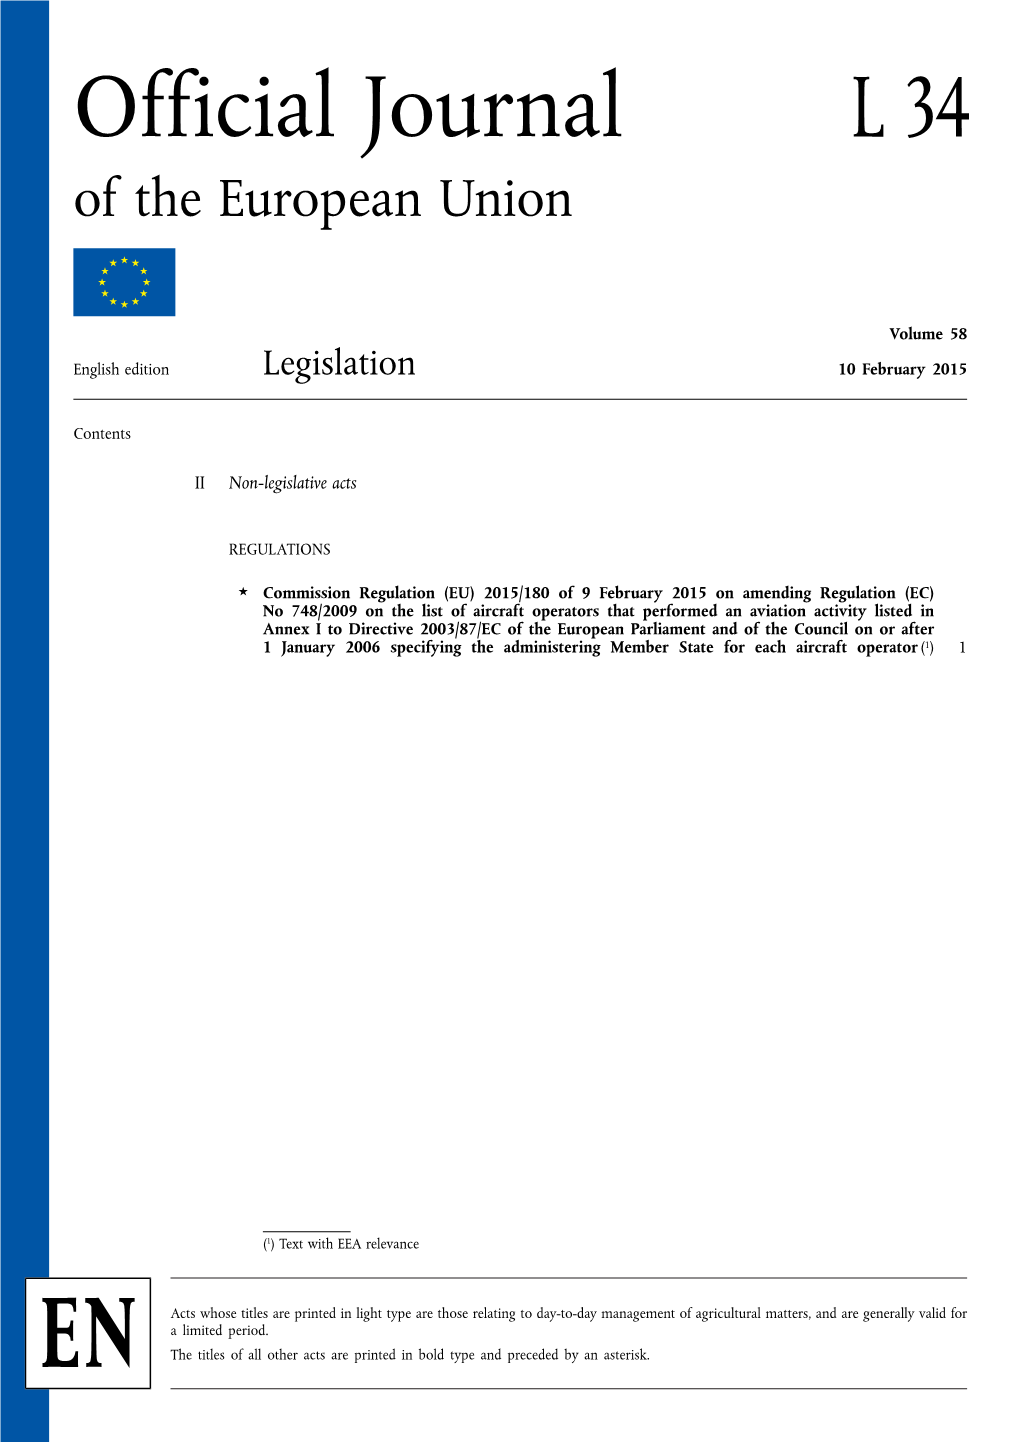 Official Journal L 34 of the European Union